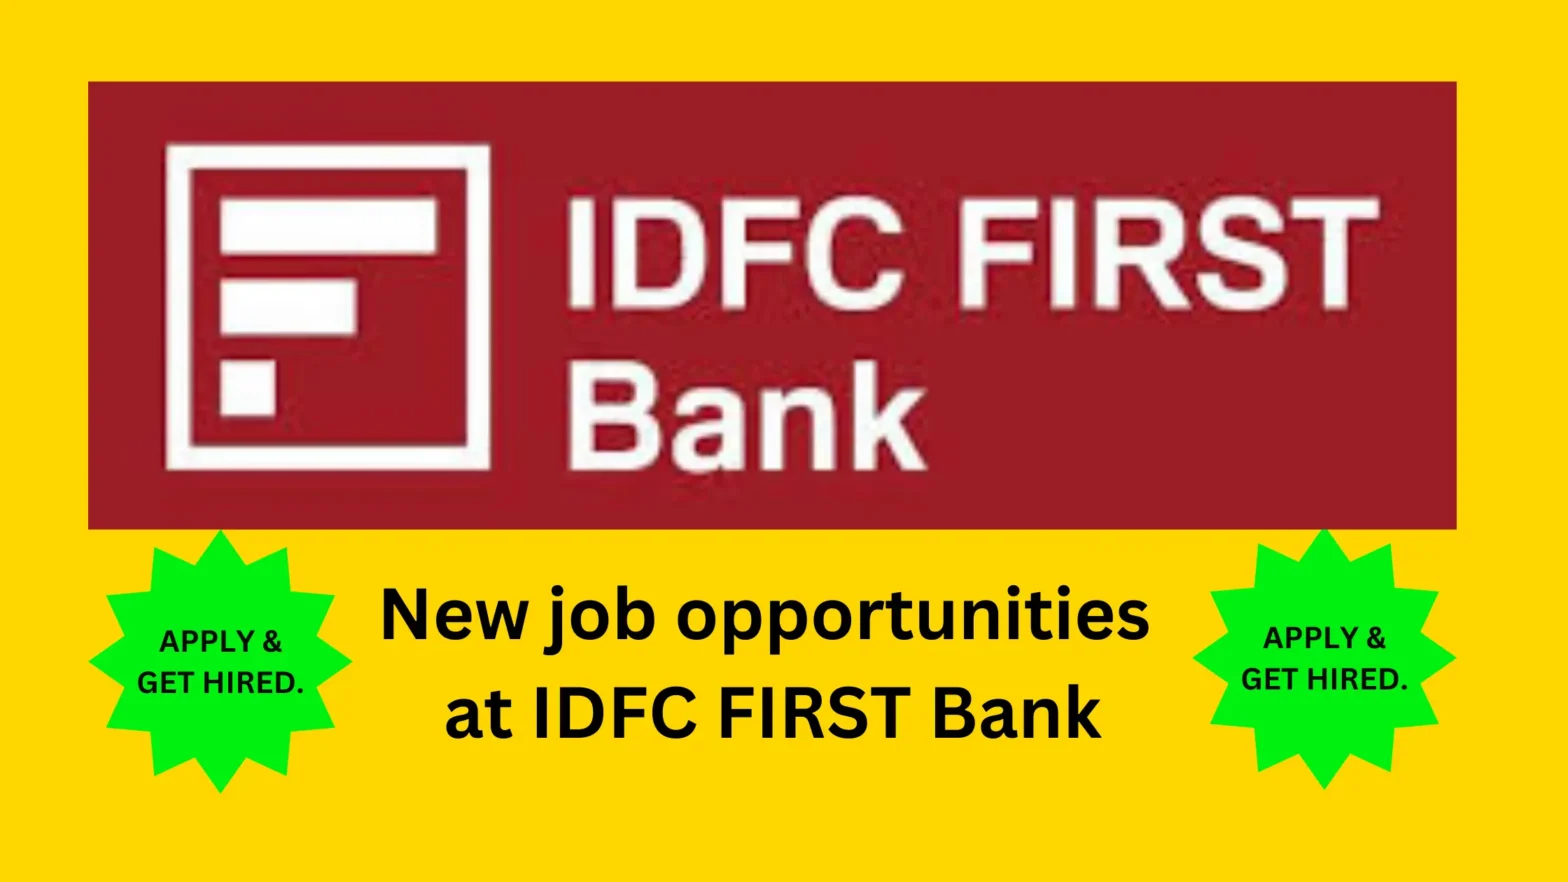 New job opportunities at IDFC FIRST Bank.